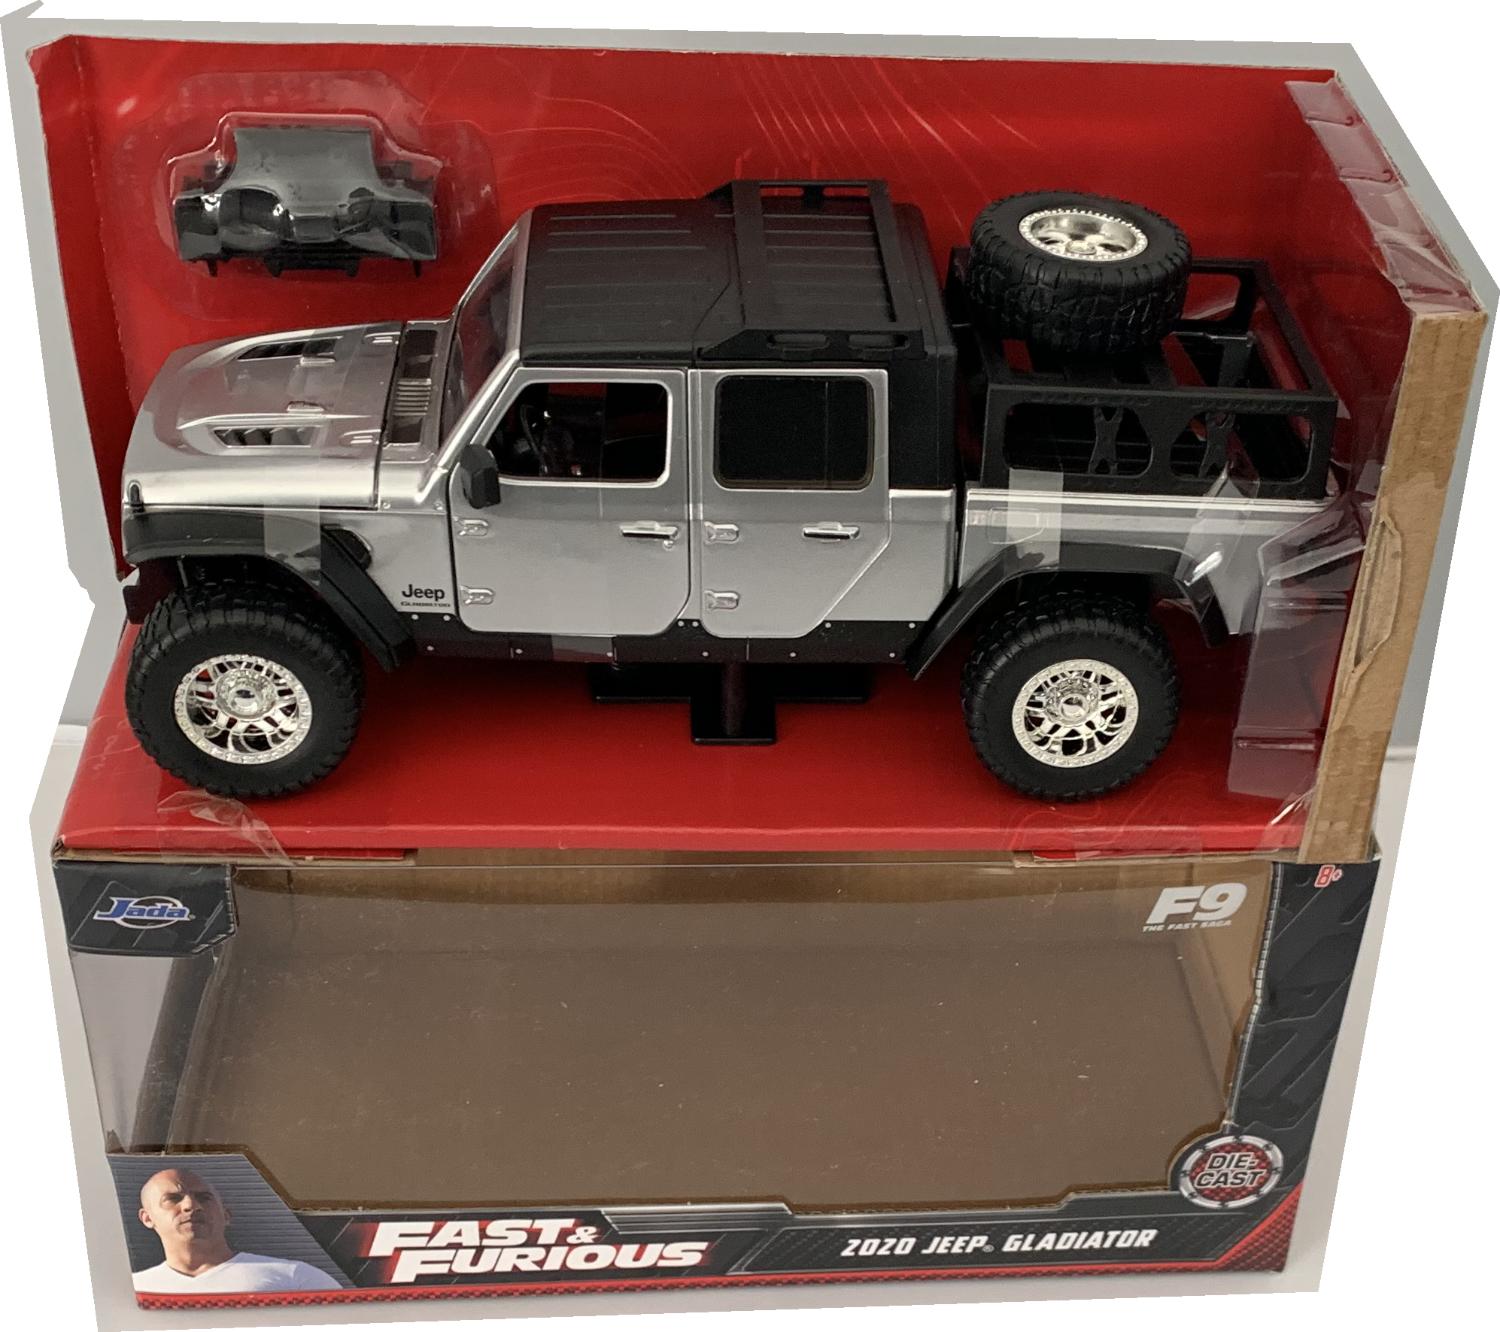 Fast and Furious 9 Jeep Gladiator 2020 in silver 1:24 scale model from Jada